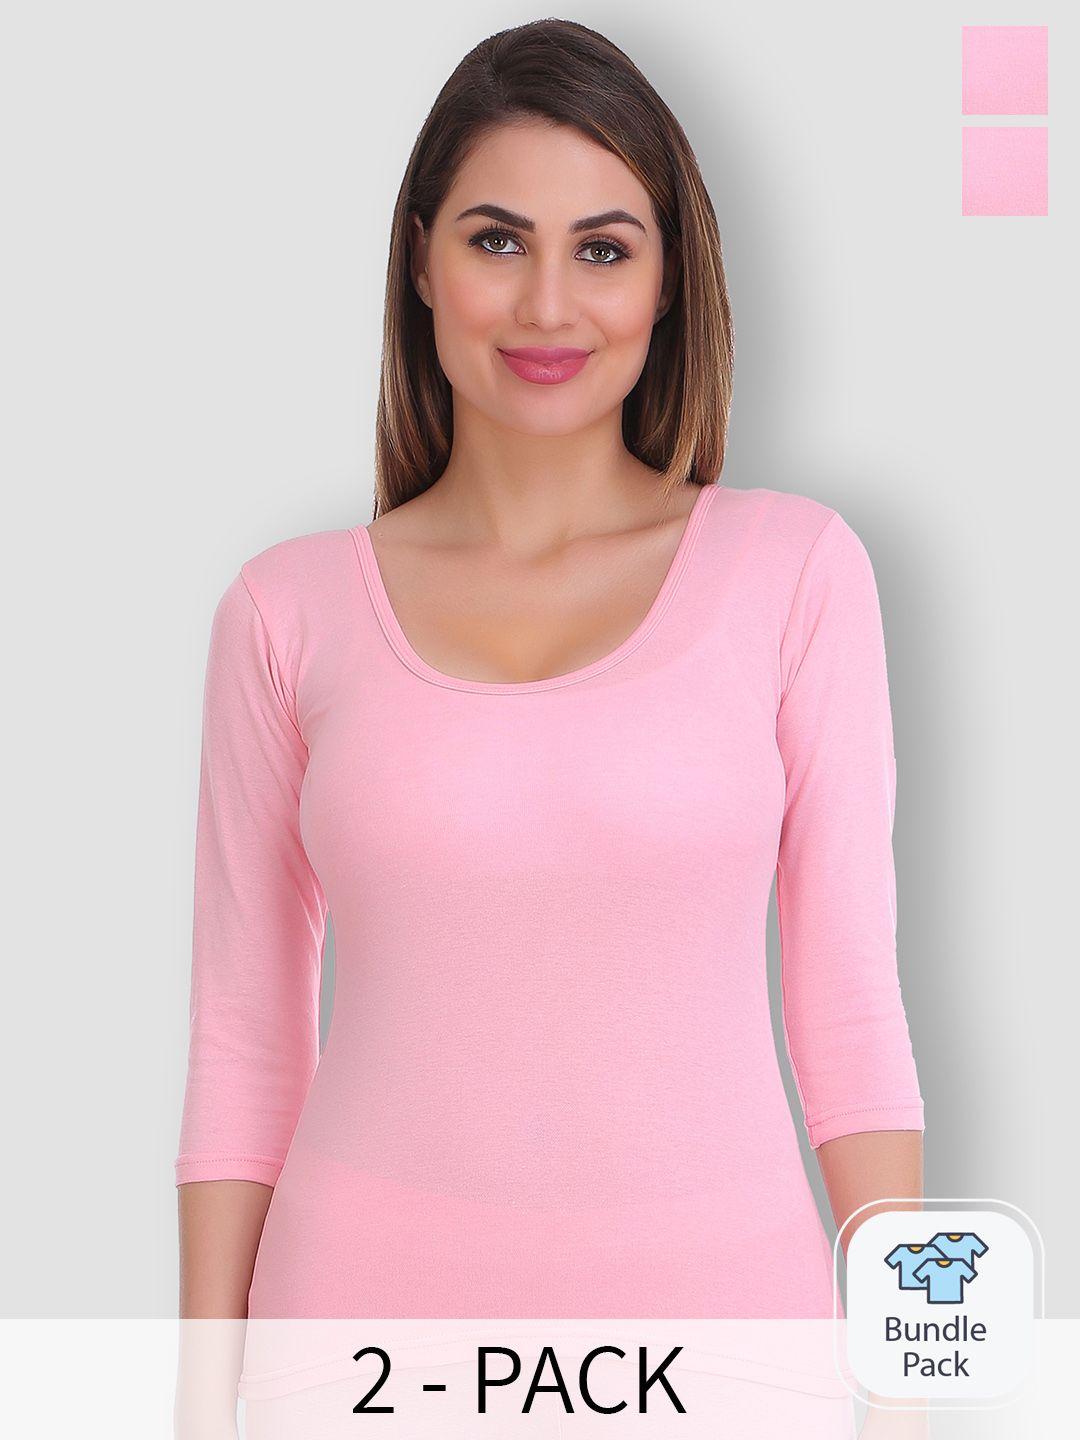 selfcare pack of 2 round neck thermal cotton tops